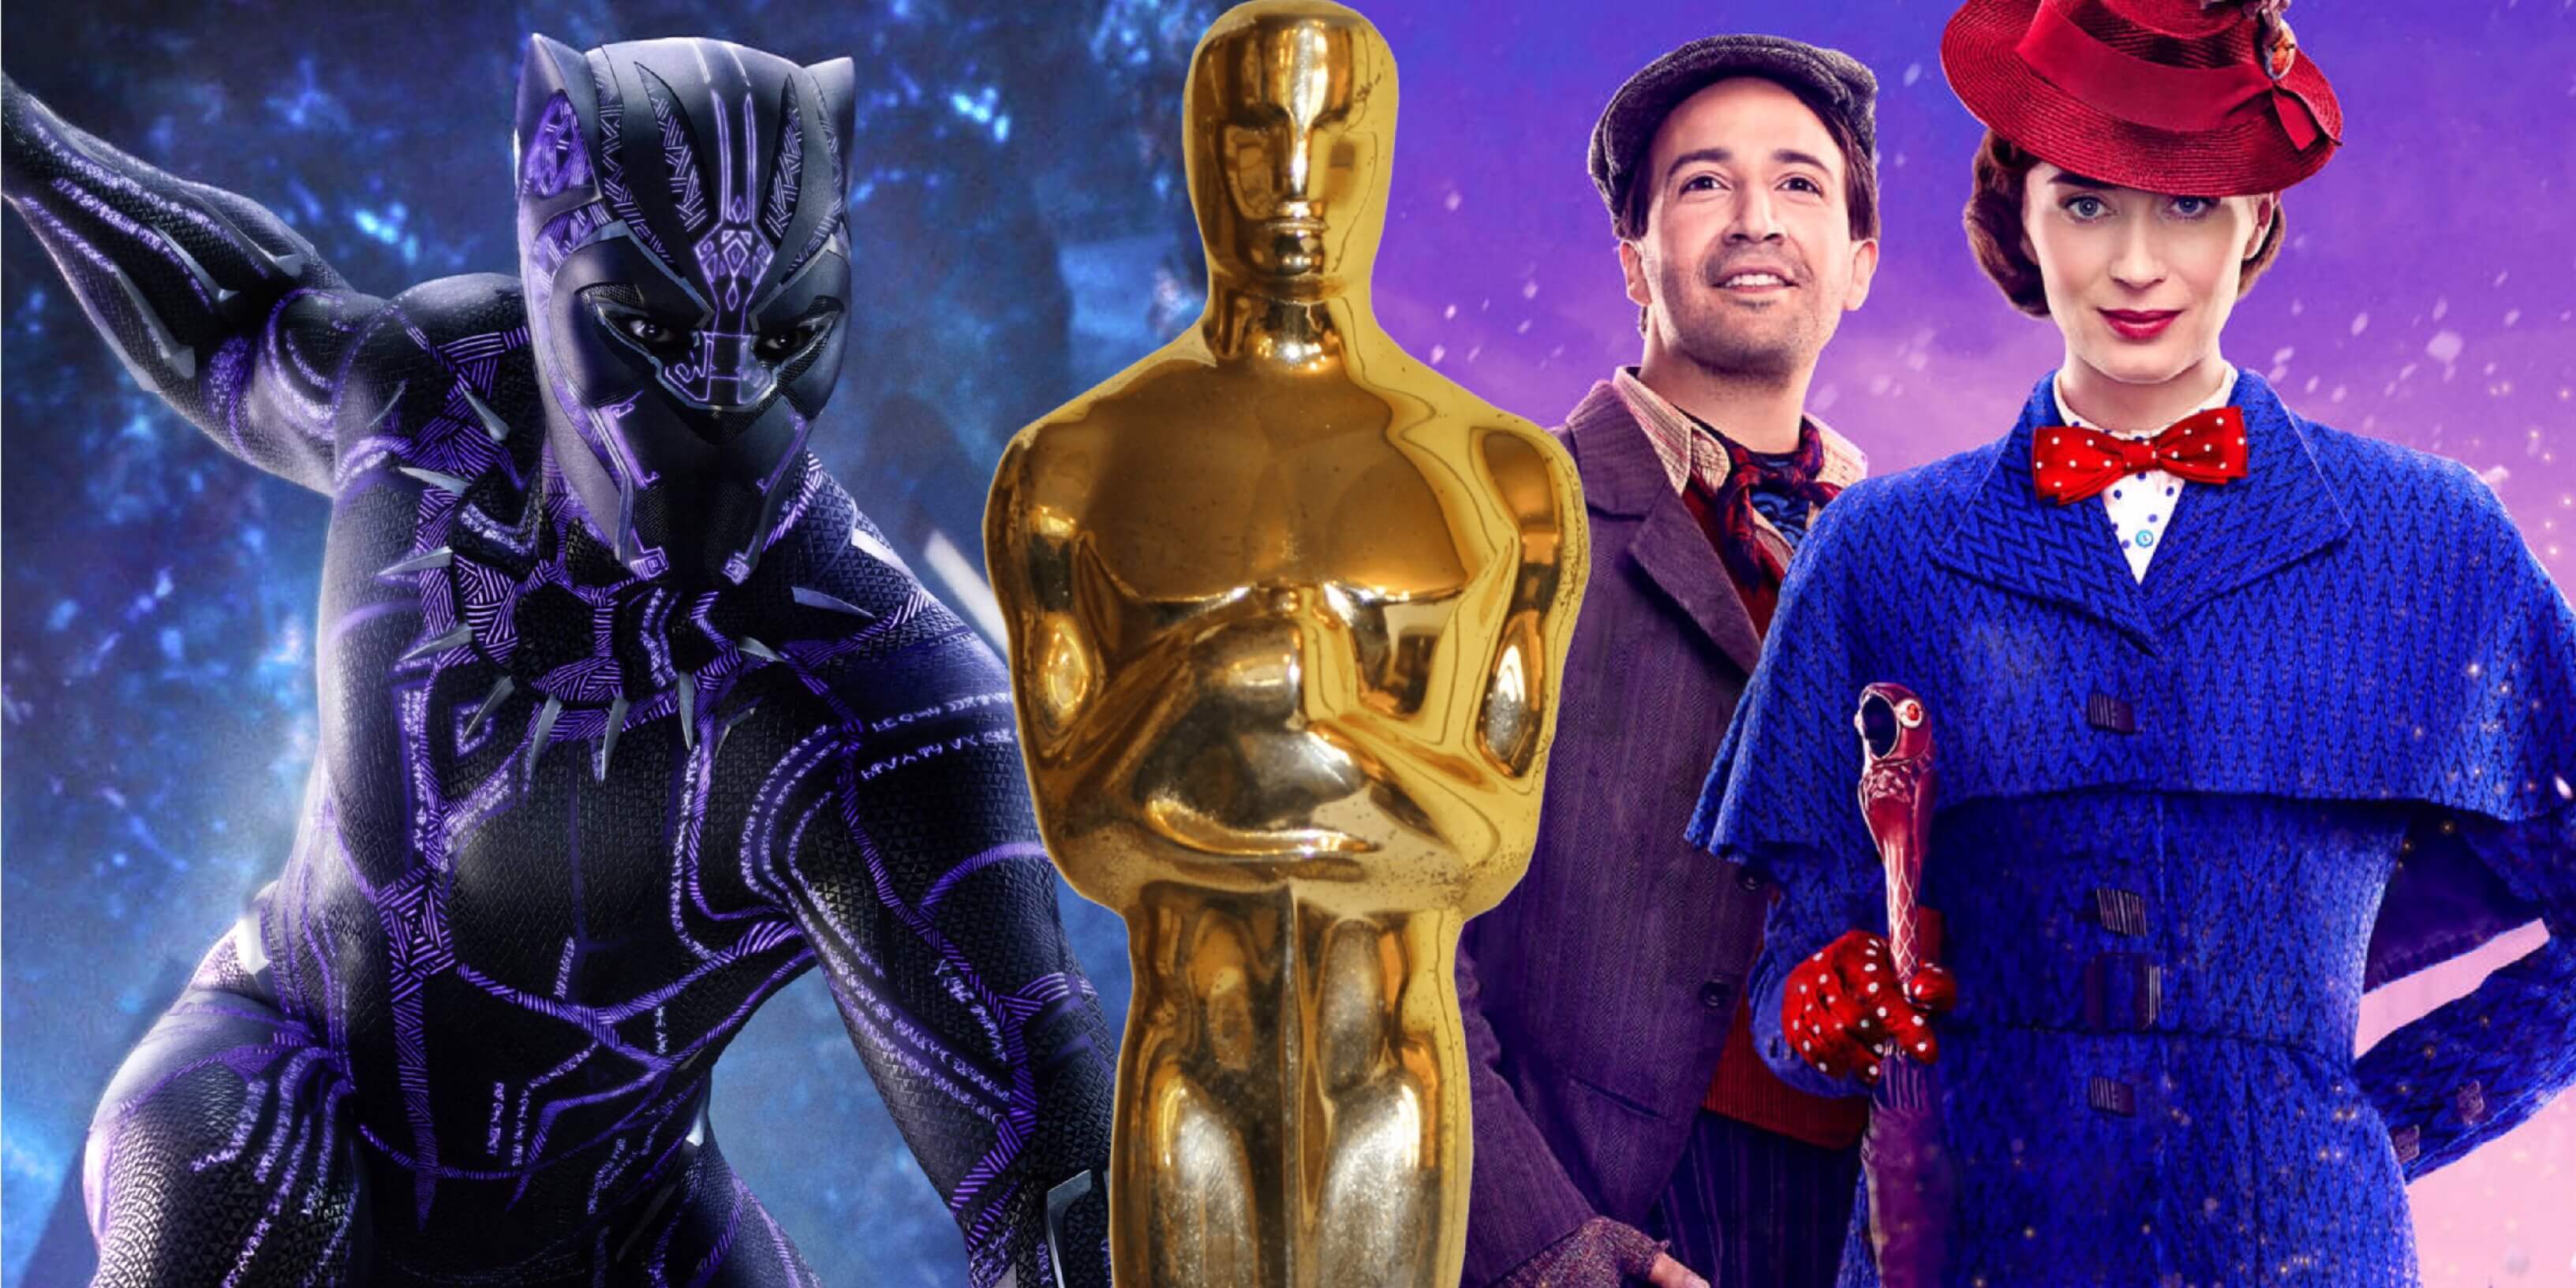 Disney Films Up For Big Oscars At The 91st Academy Awards